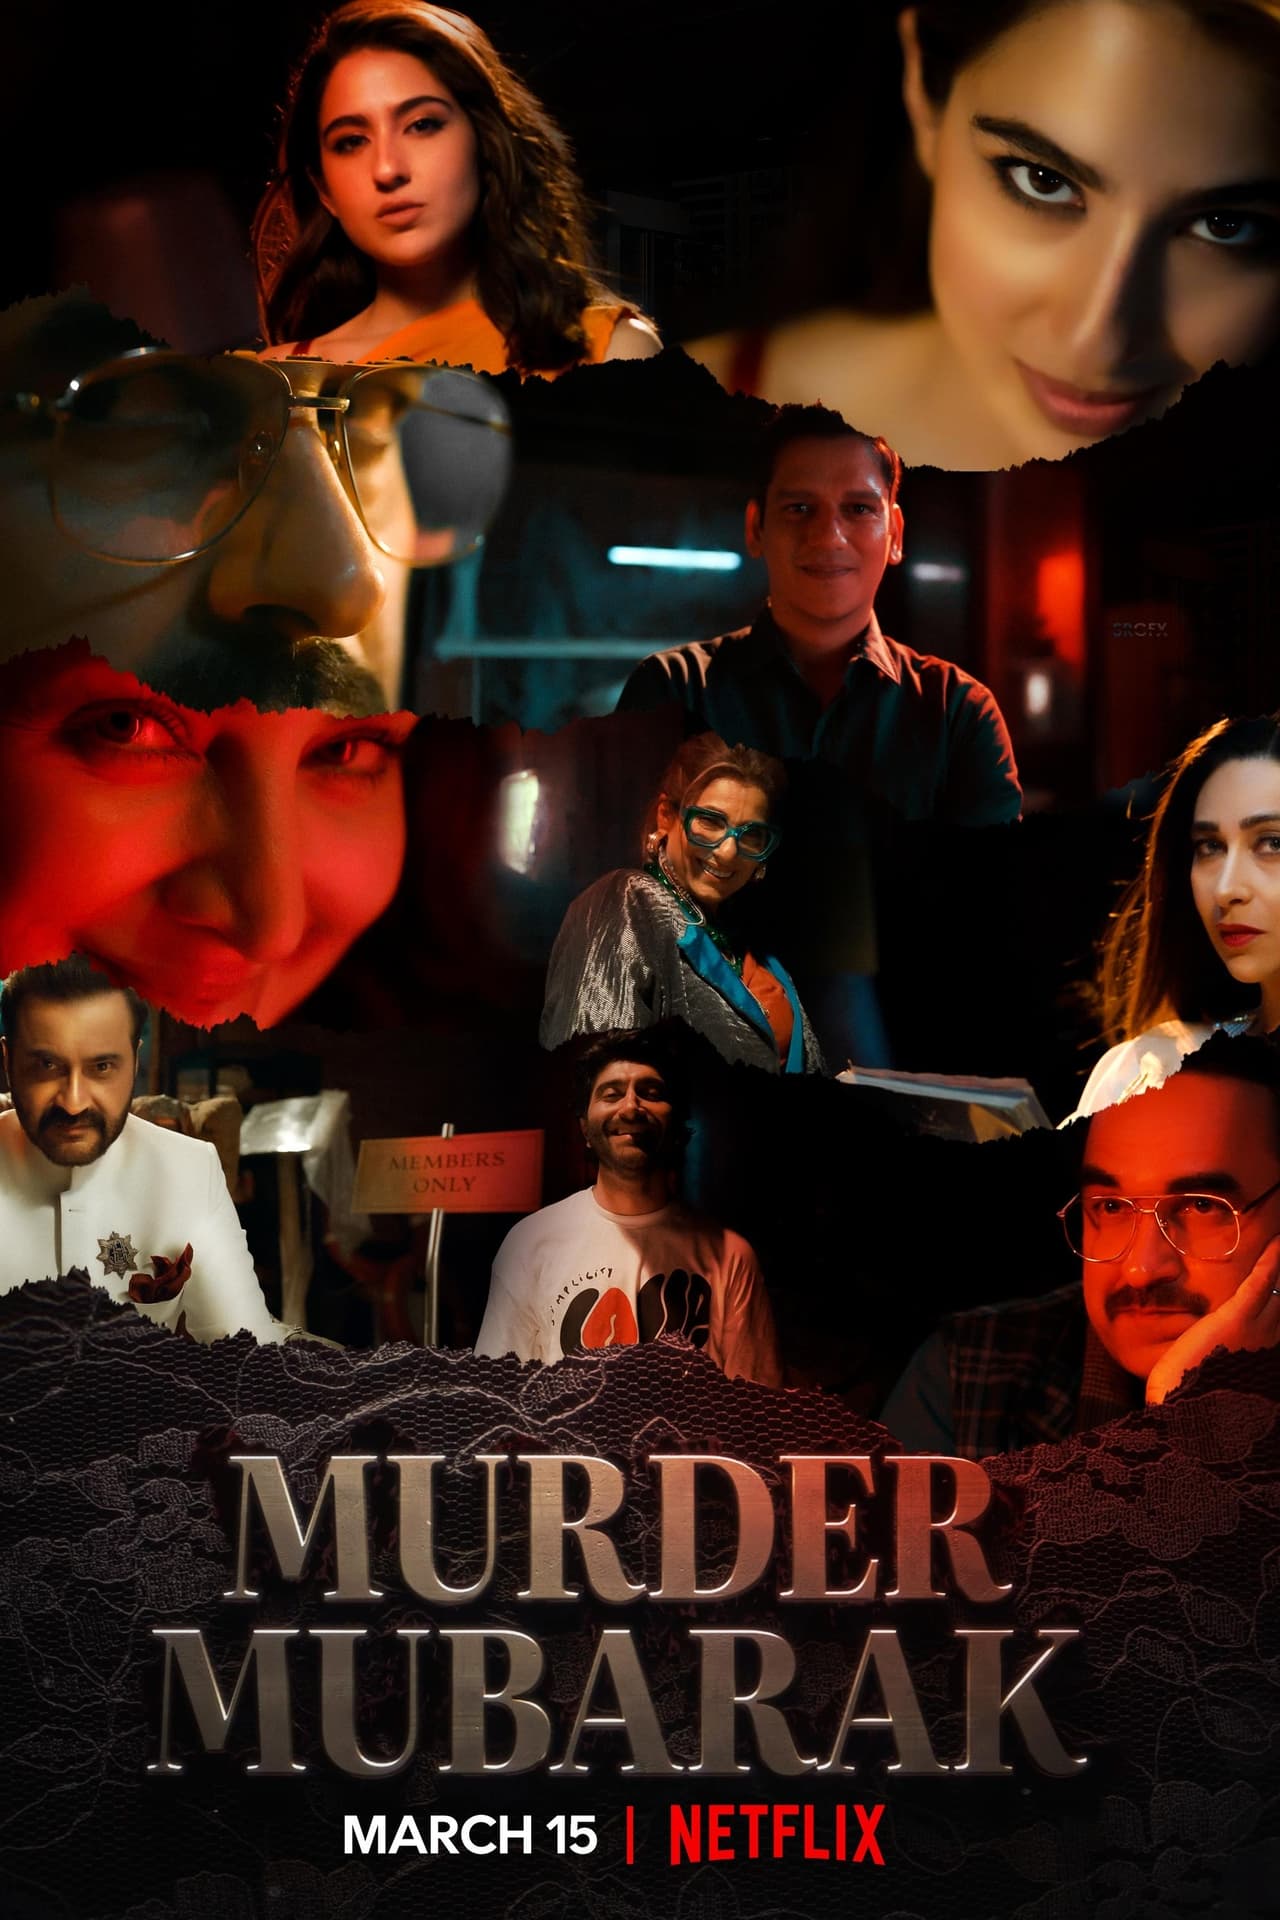 When a gym trainer is murdered at an elite Delhi club, a wily investigator unravels the sordid secrets of its ultrarich members to find the killer.